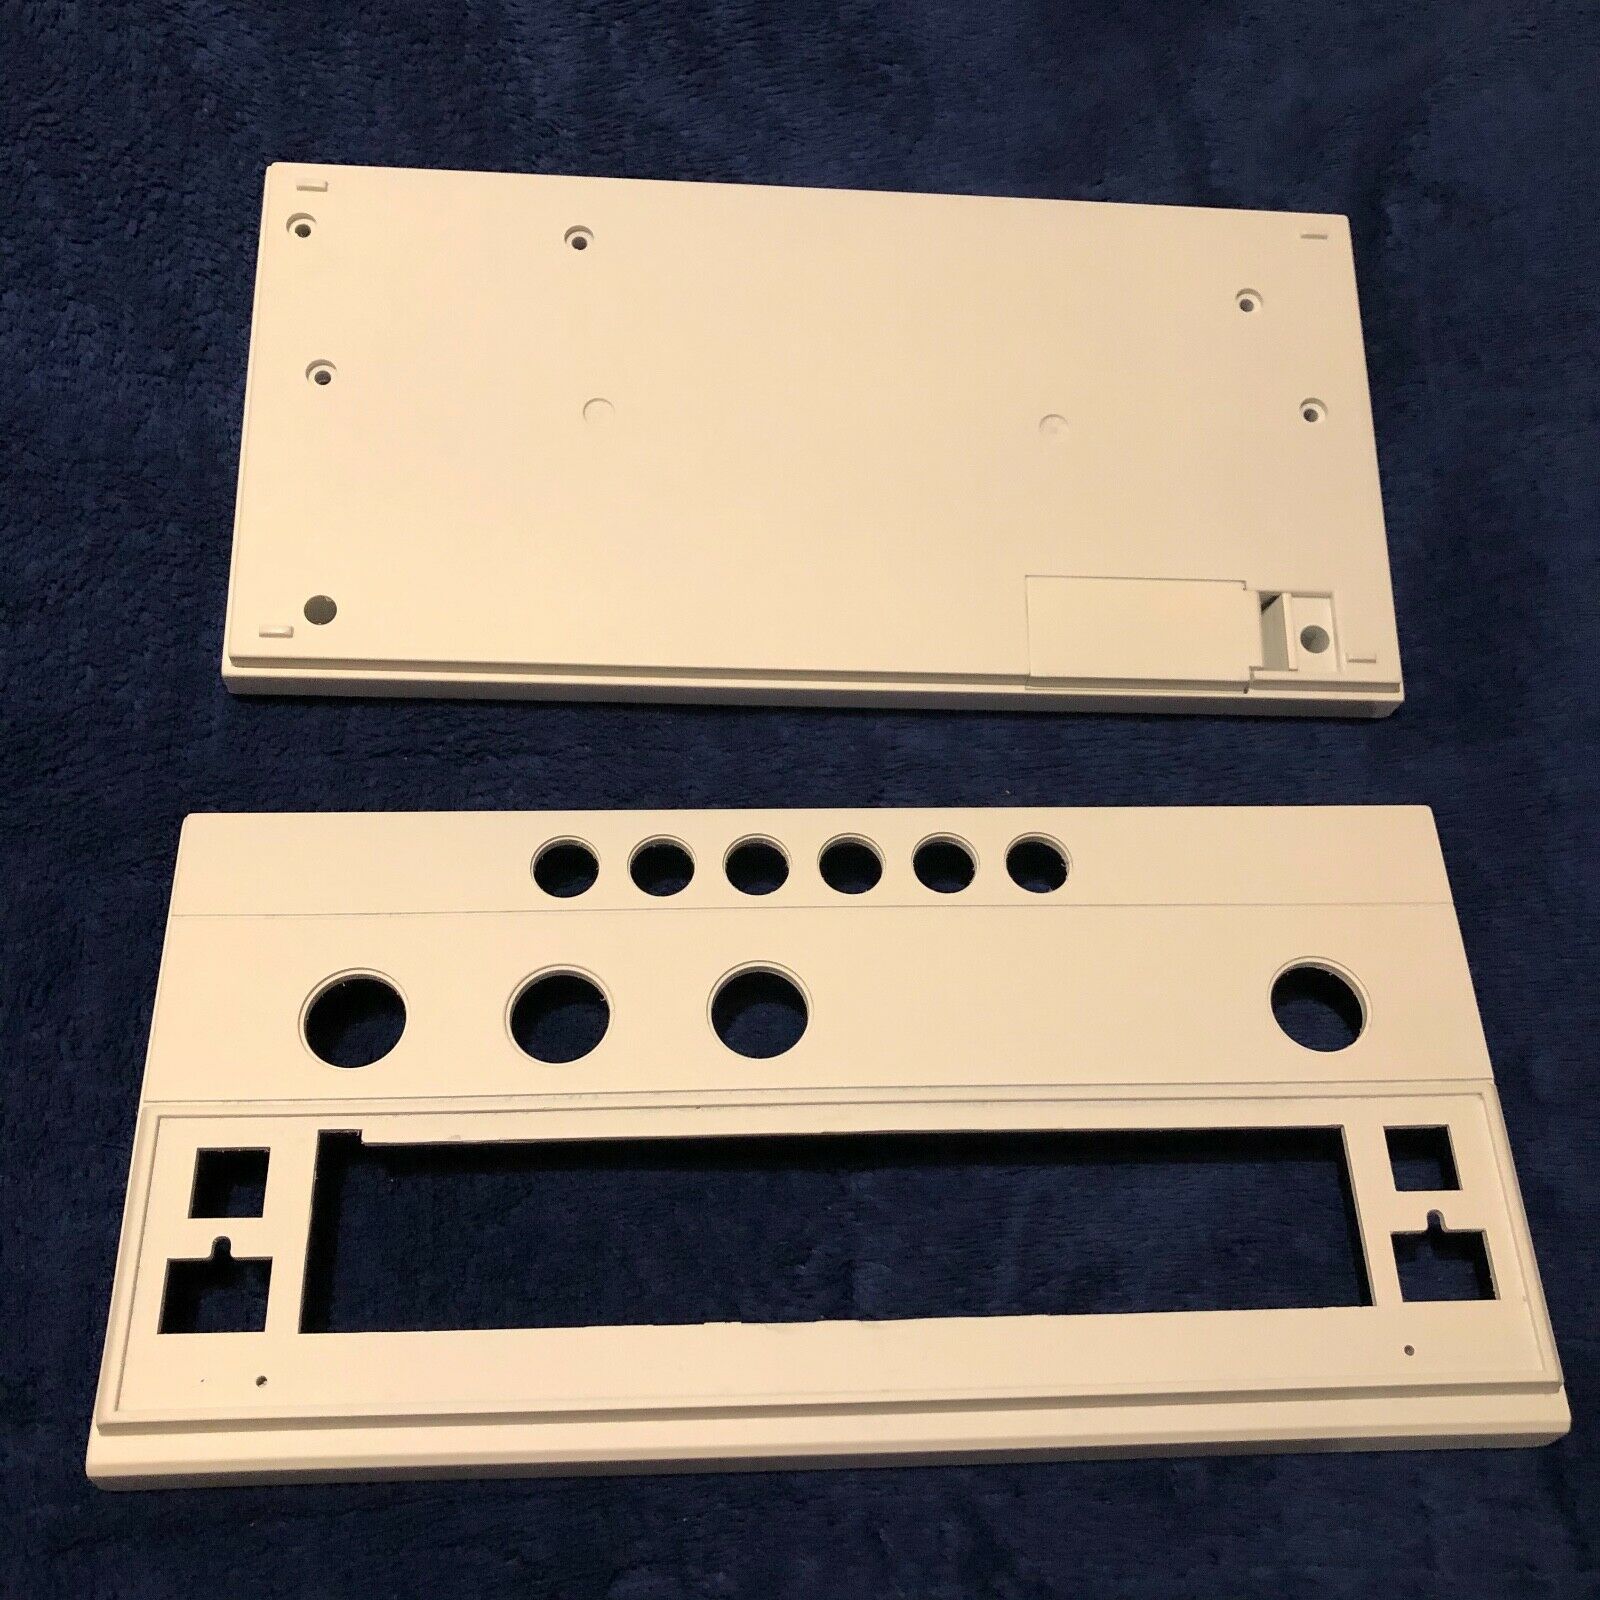 Roland TB 303 TR 606 Cyclone TT 303 Replacement Battery Door Cover 